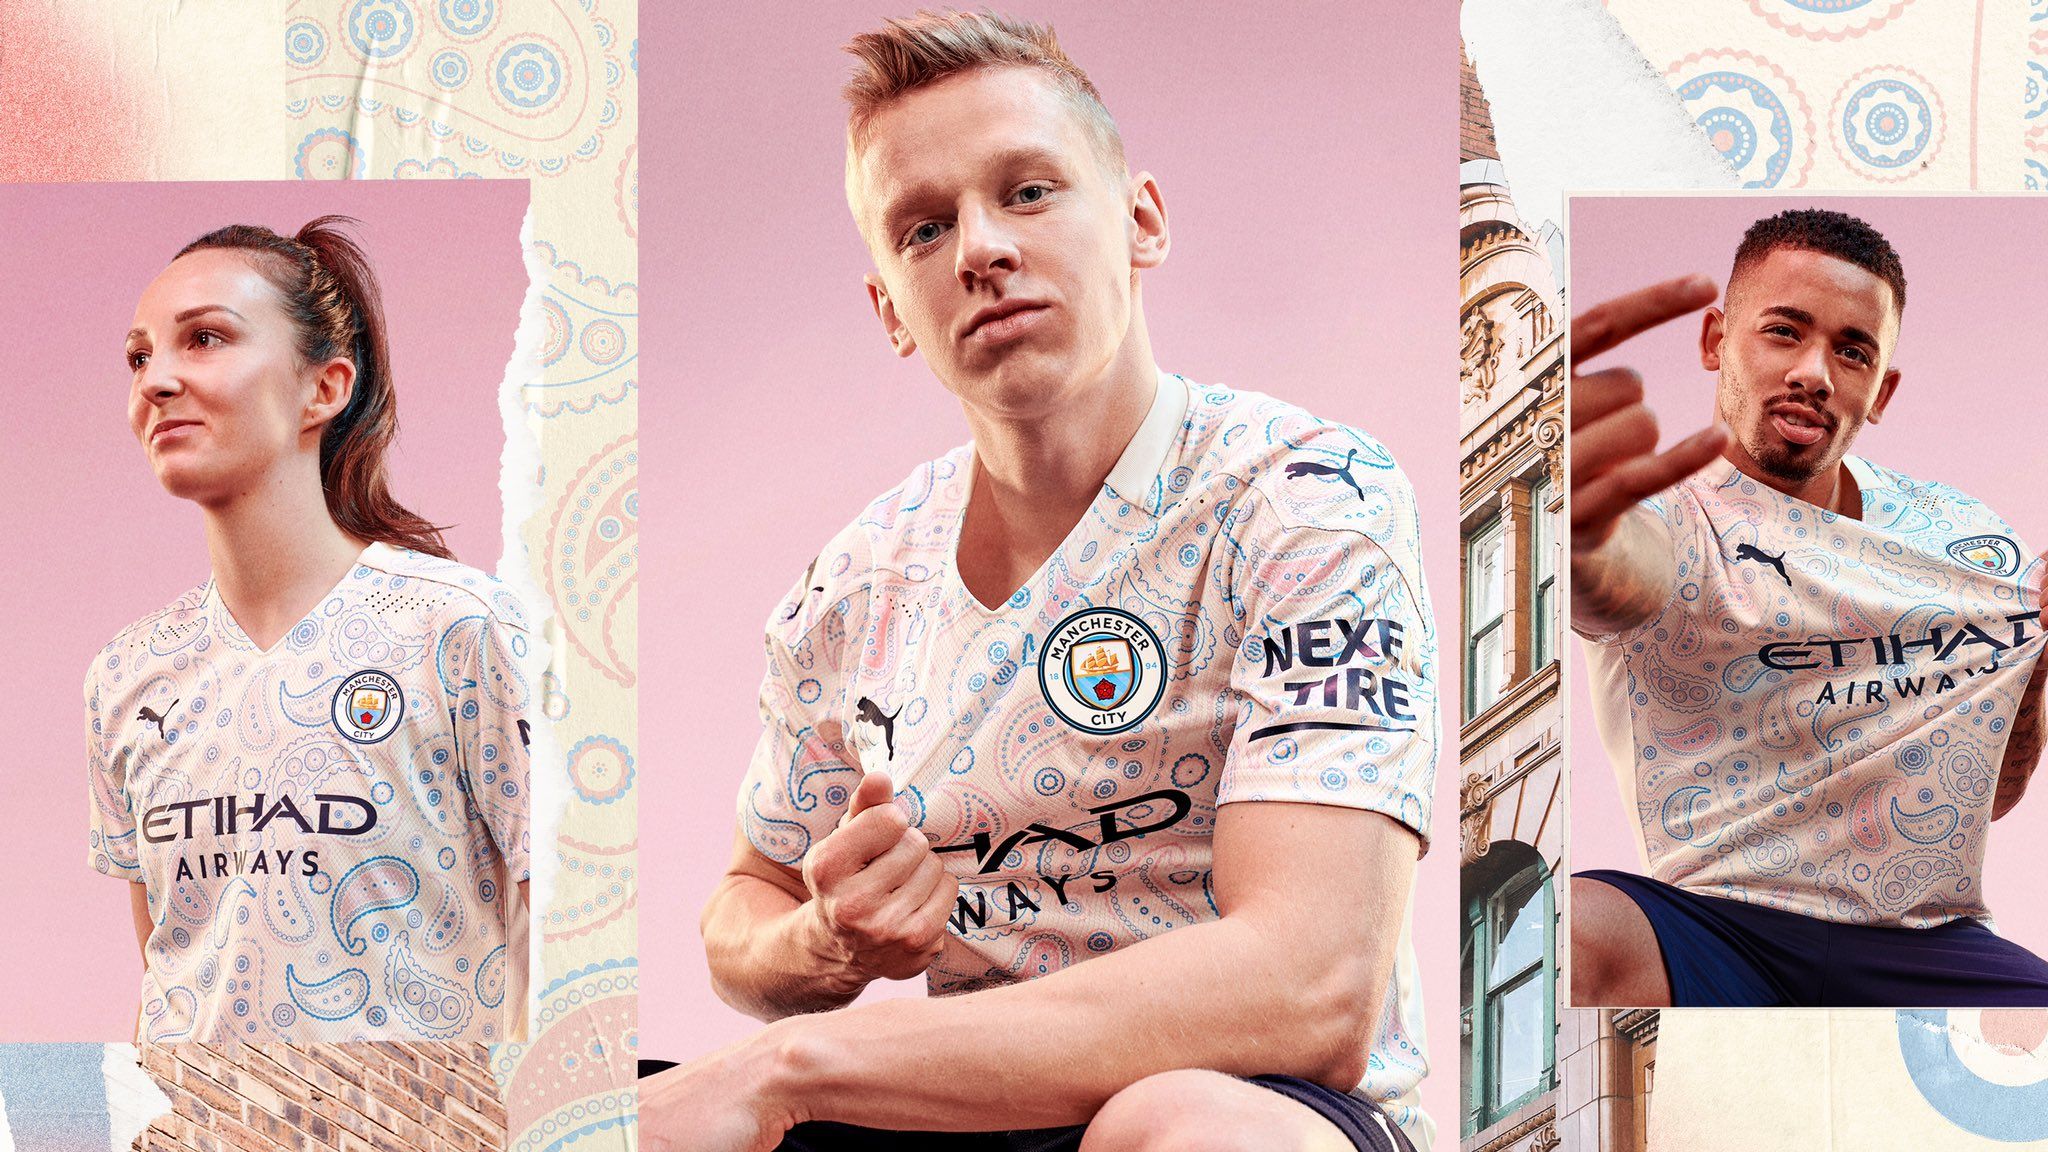 Man City's 'Brit Pop' paisley third kit is a bold abomination. Who Ate all the Pies